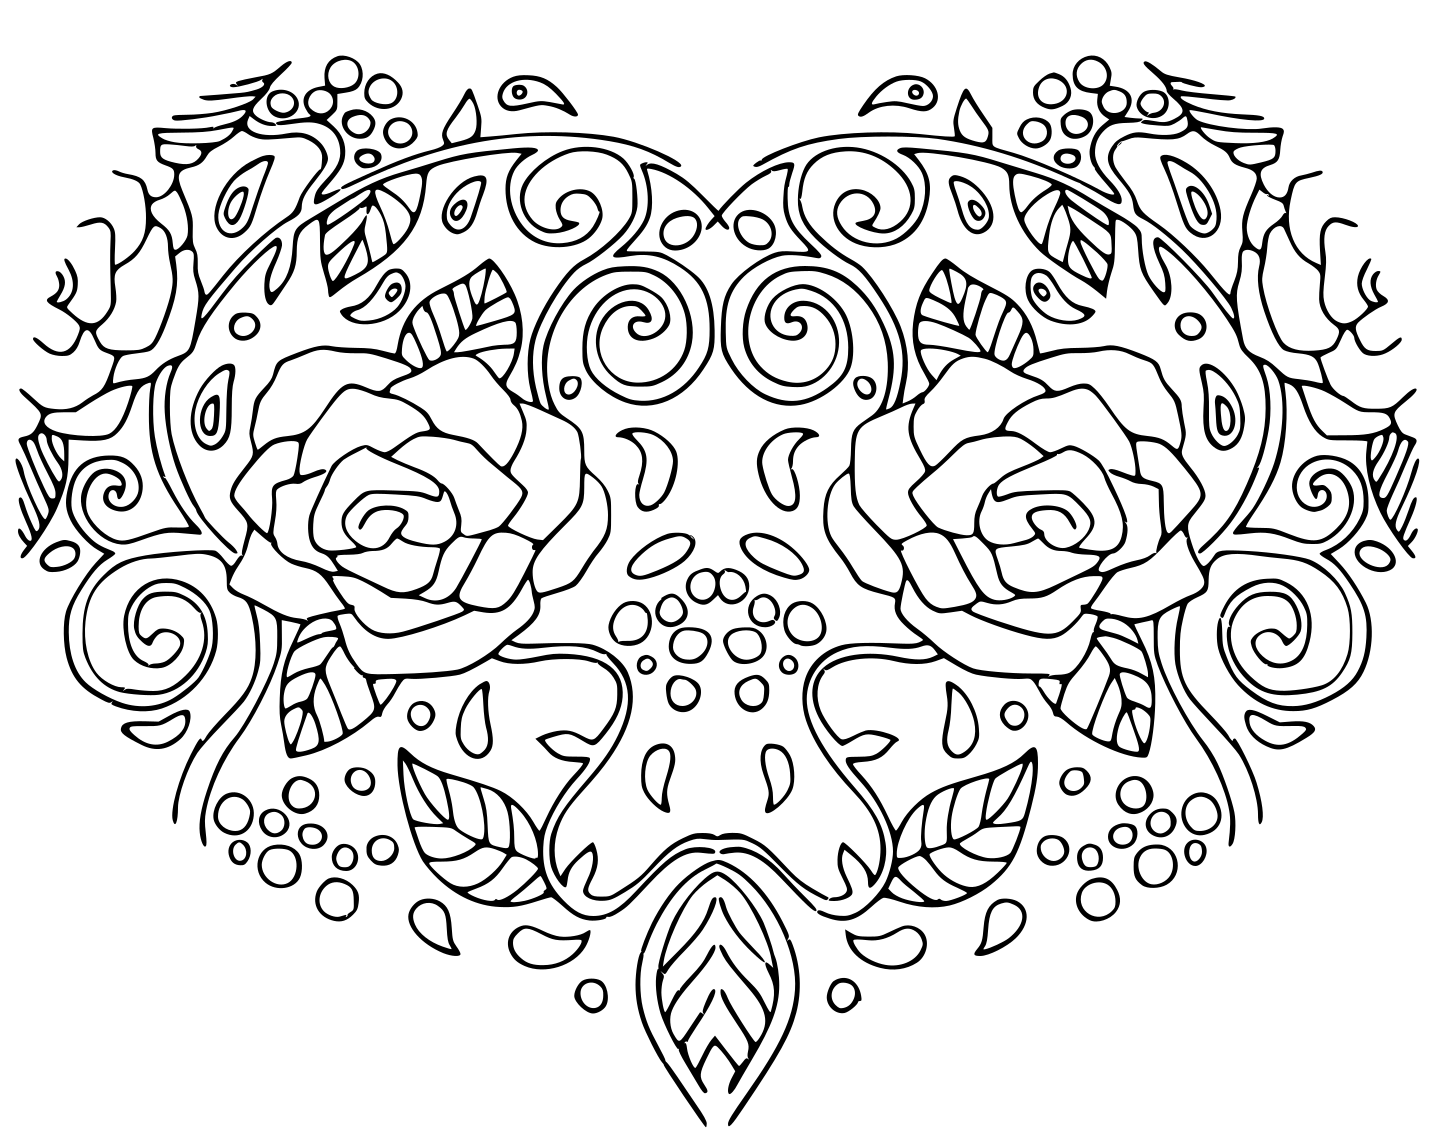 Decorative Love Heart With Flowers Valentines Day Card For Adult And Children Coloring Page